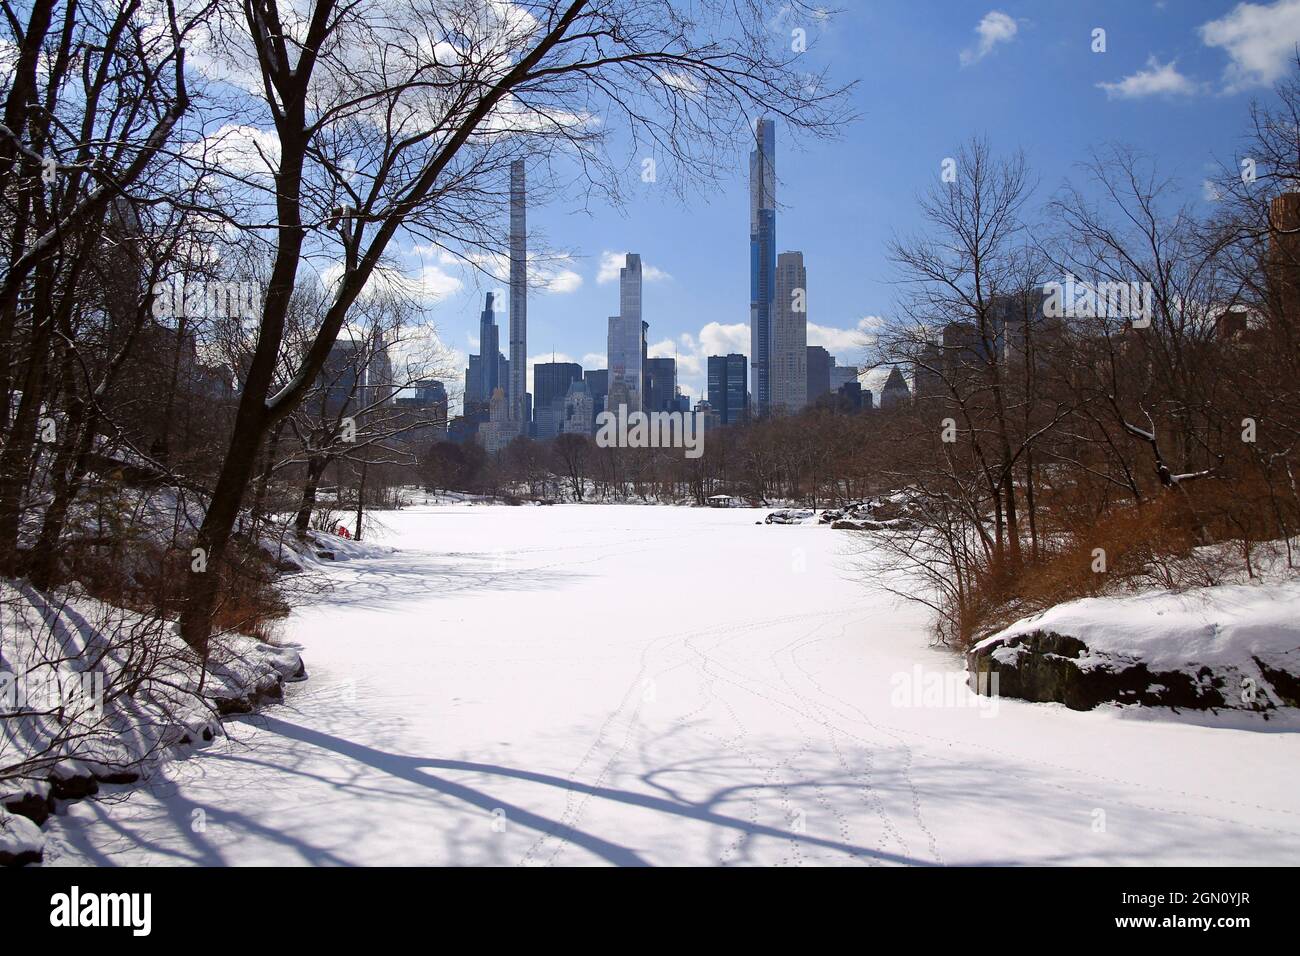 The spectacular skyscrapers of the billionaire row behind the snowy lake of Central Park in New York City Stock Photo